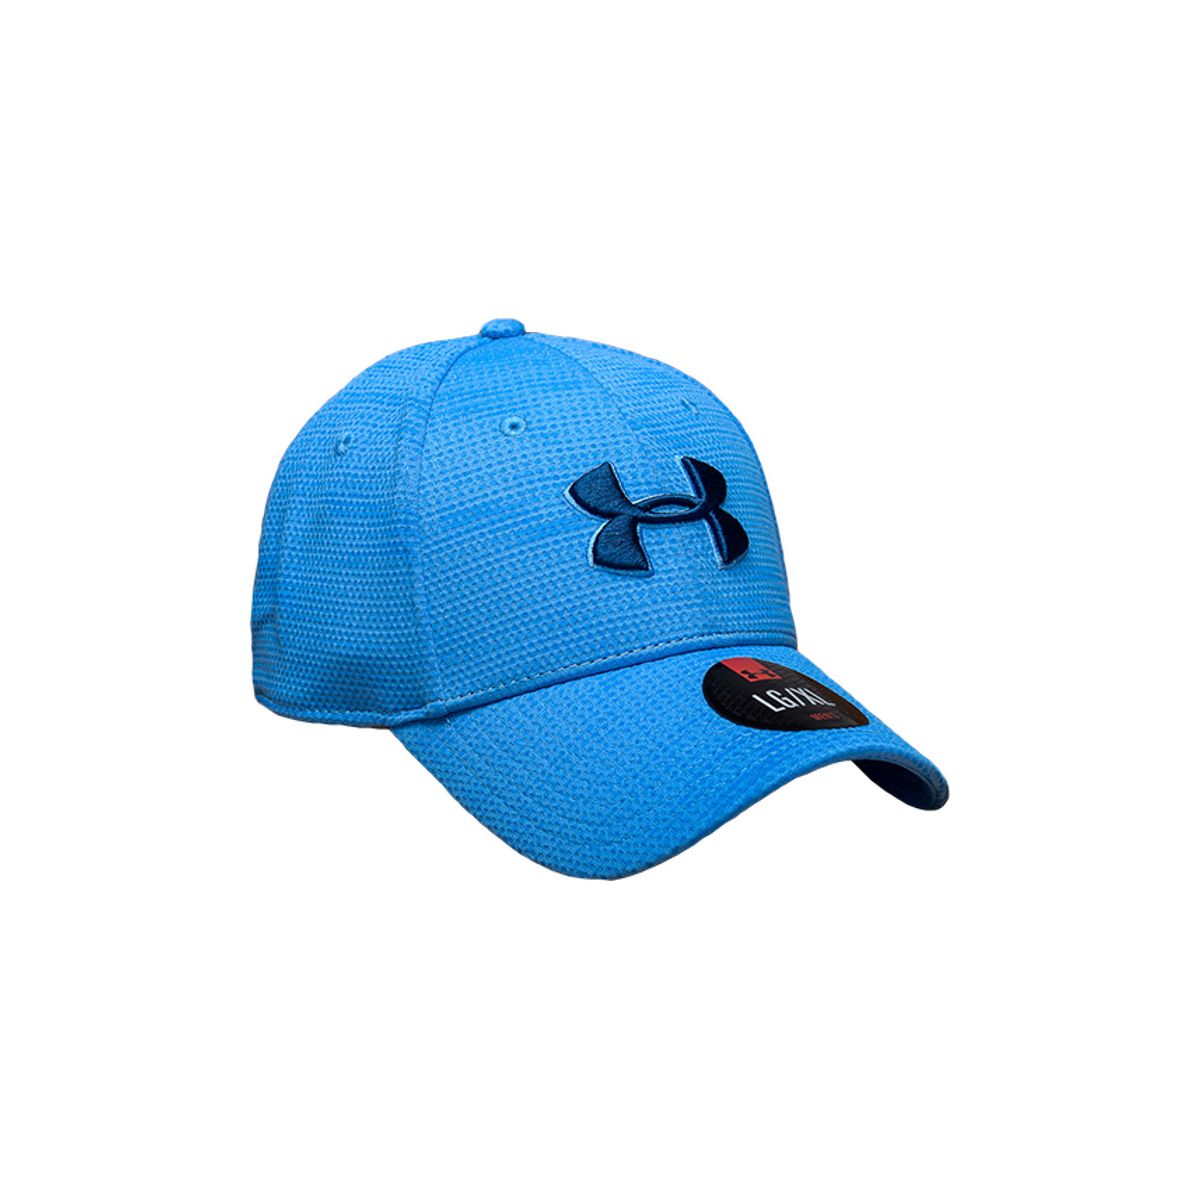 Under Armour Printed Blitzing Stretch Fit Men's Cap 1273197-